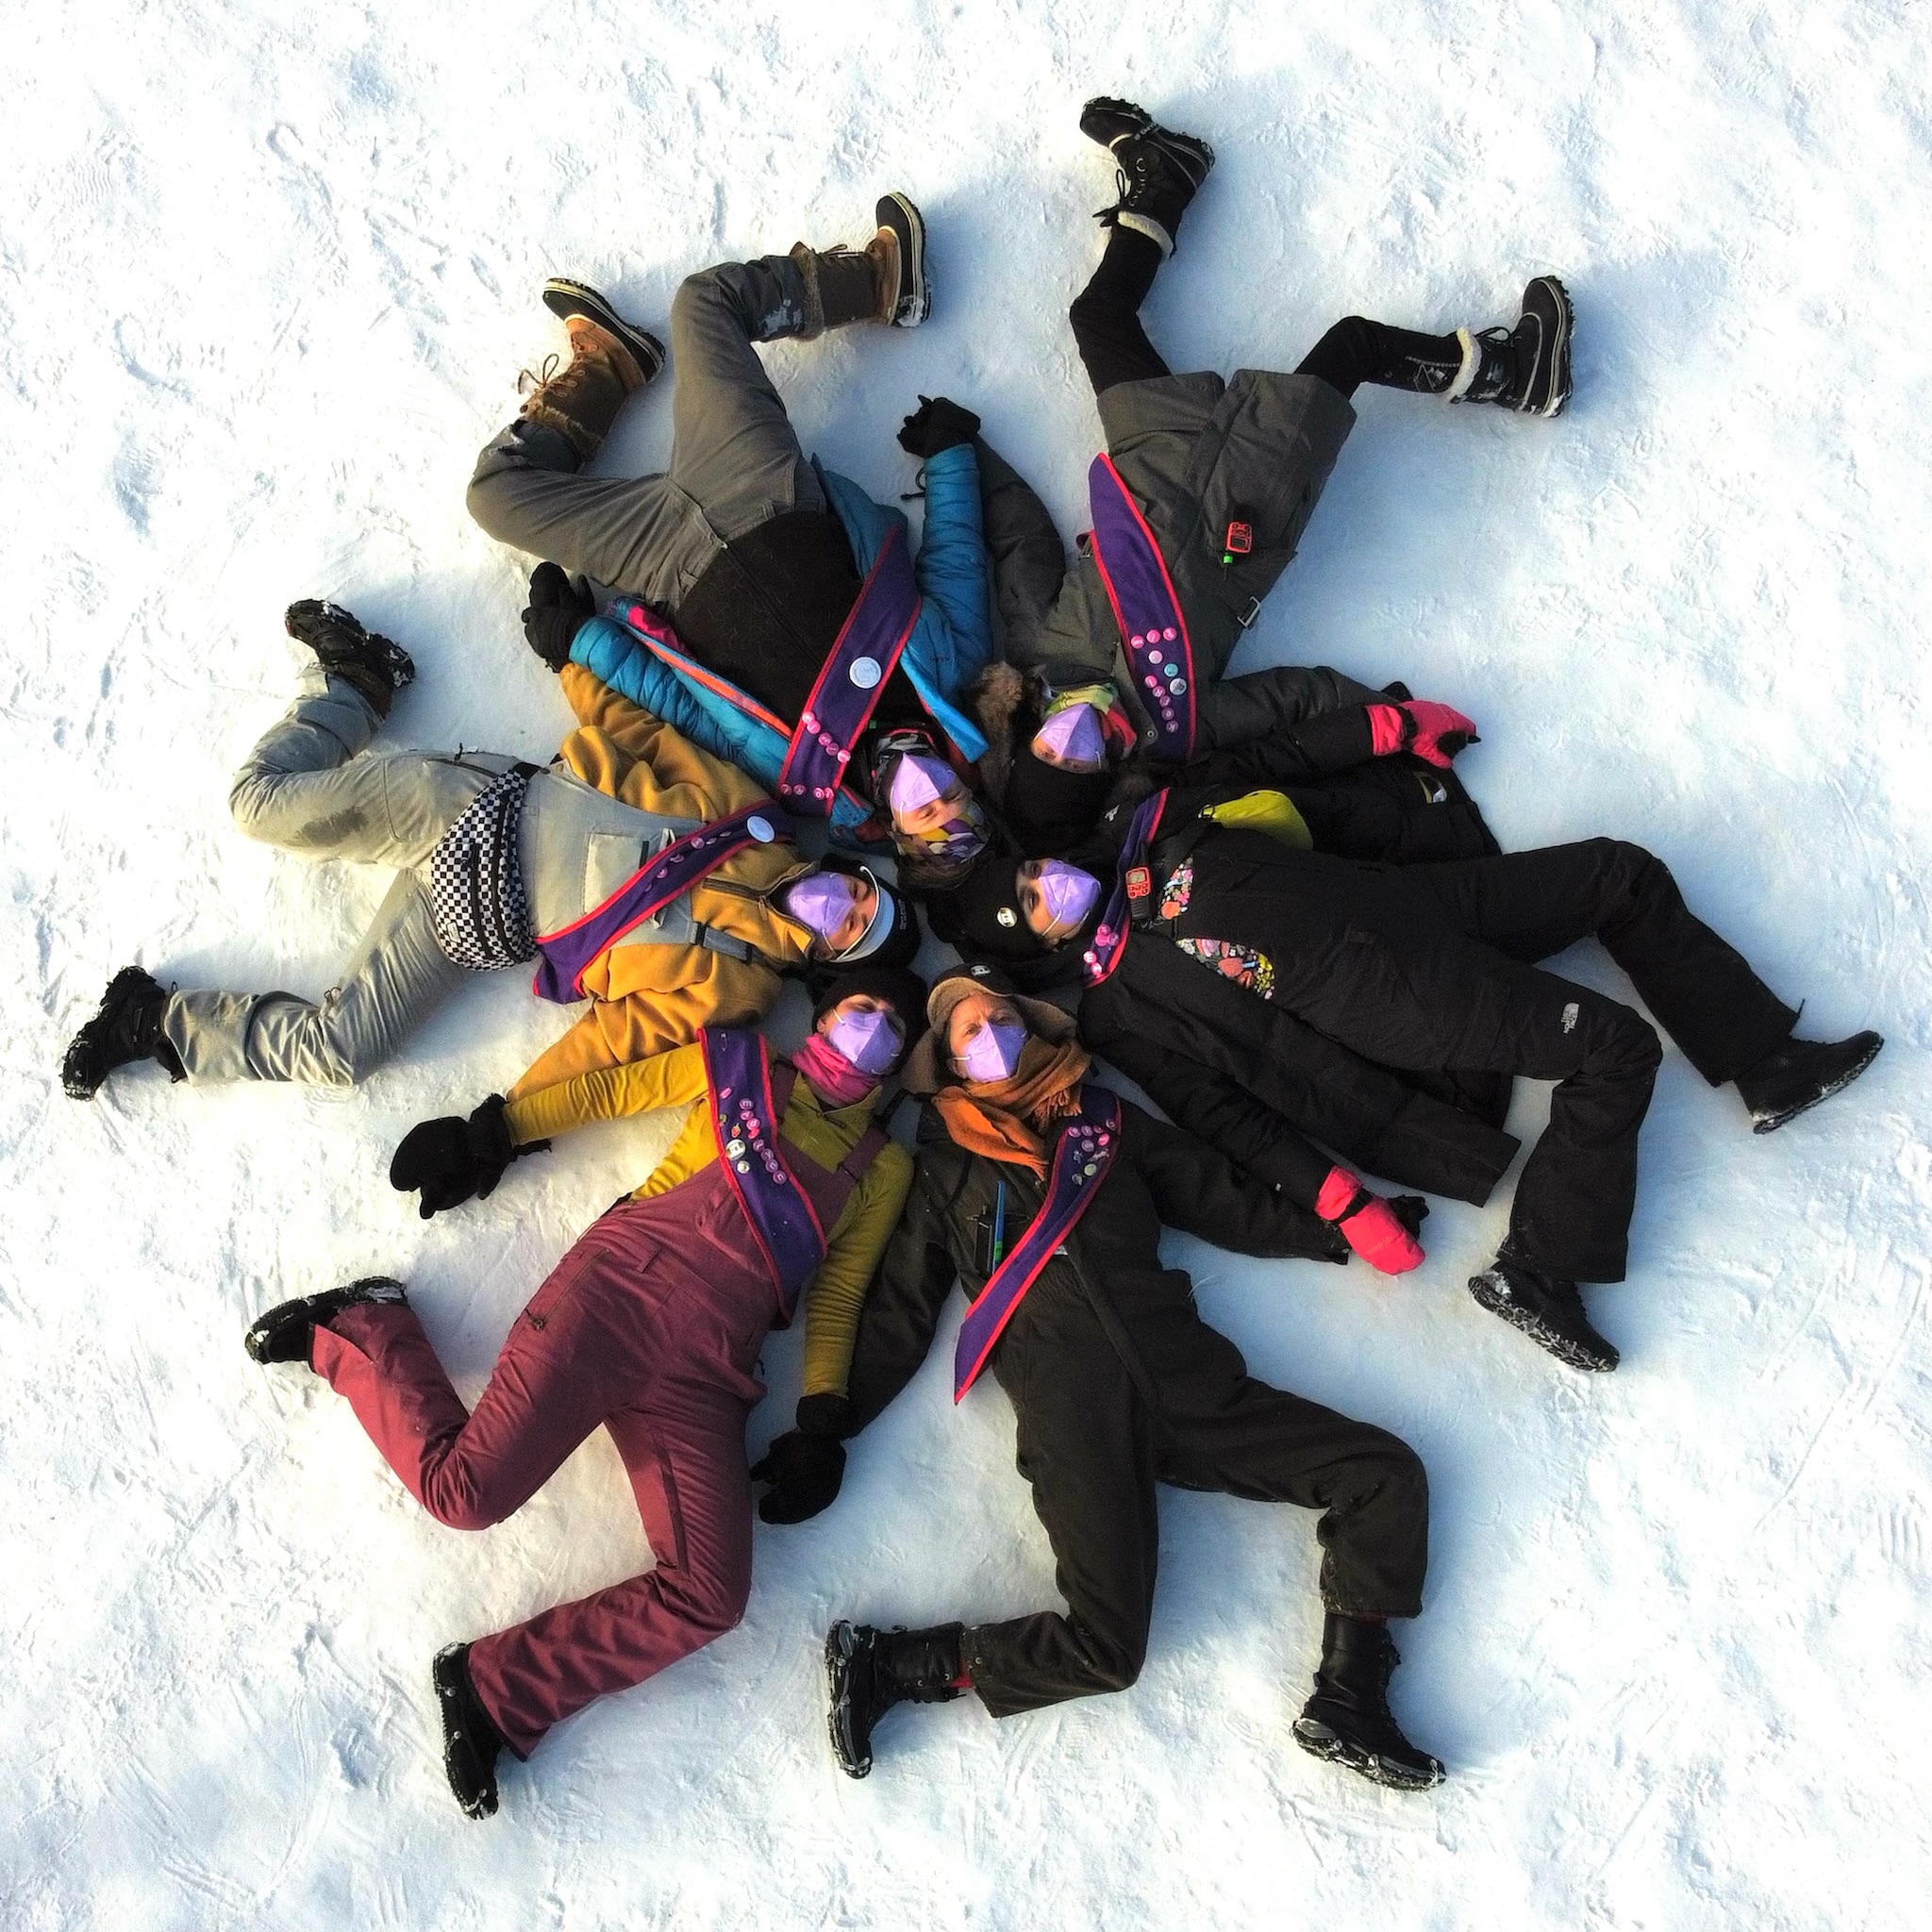 A view from above: six people in snowsuits lay with their heads in the center and feet extending out, in snowflake formation.